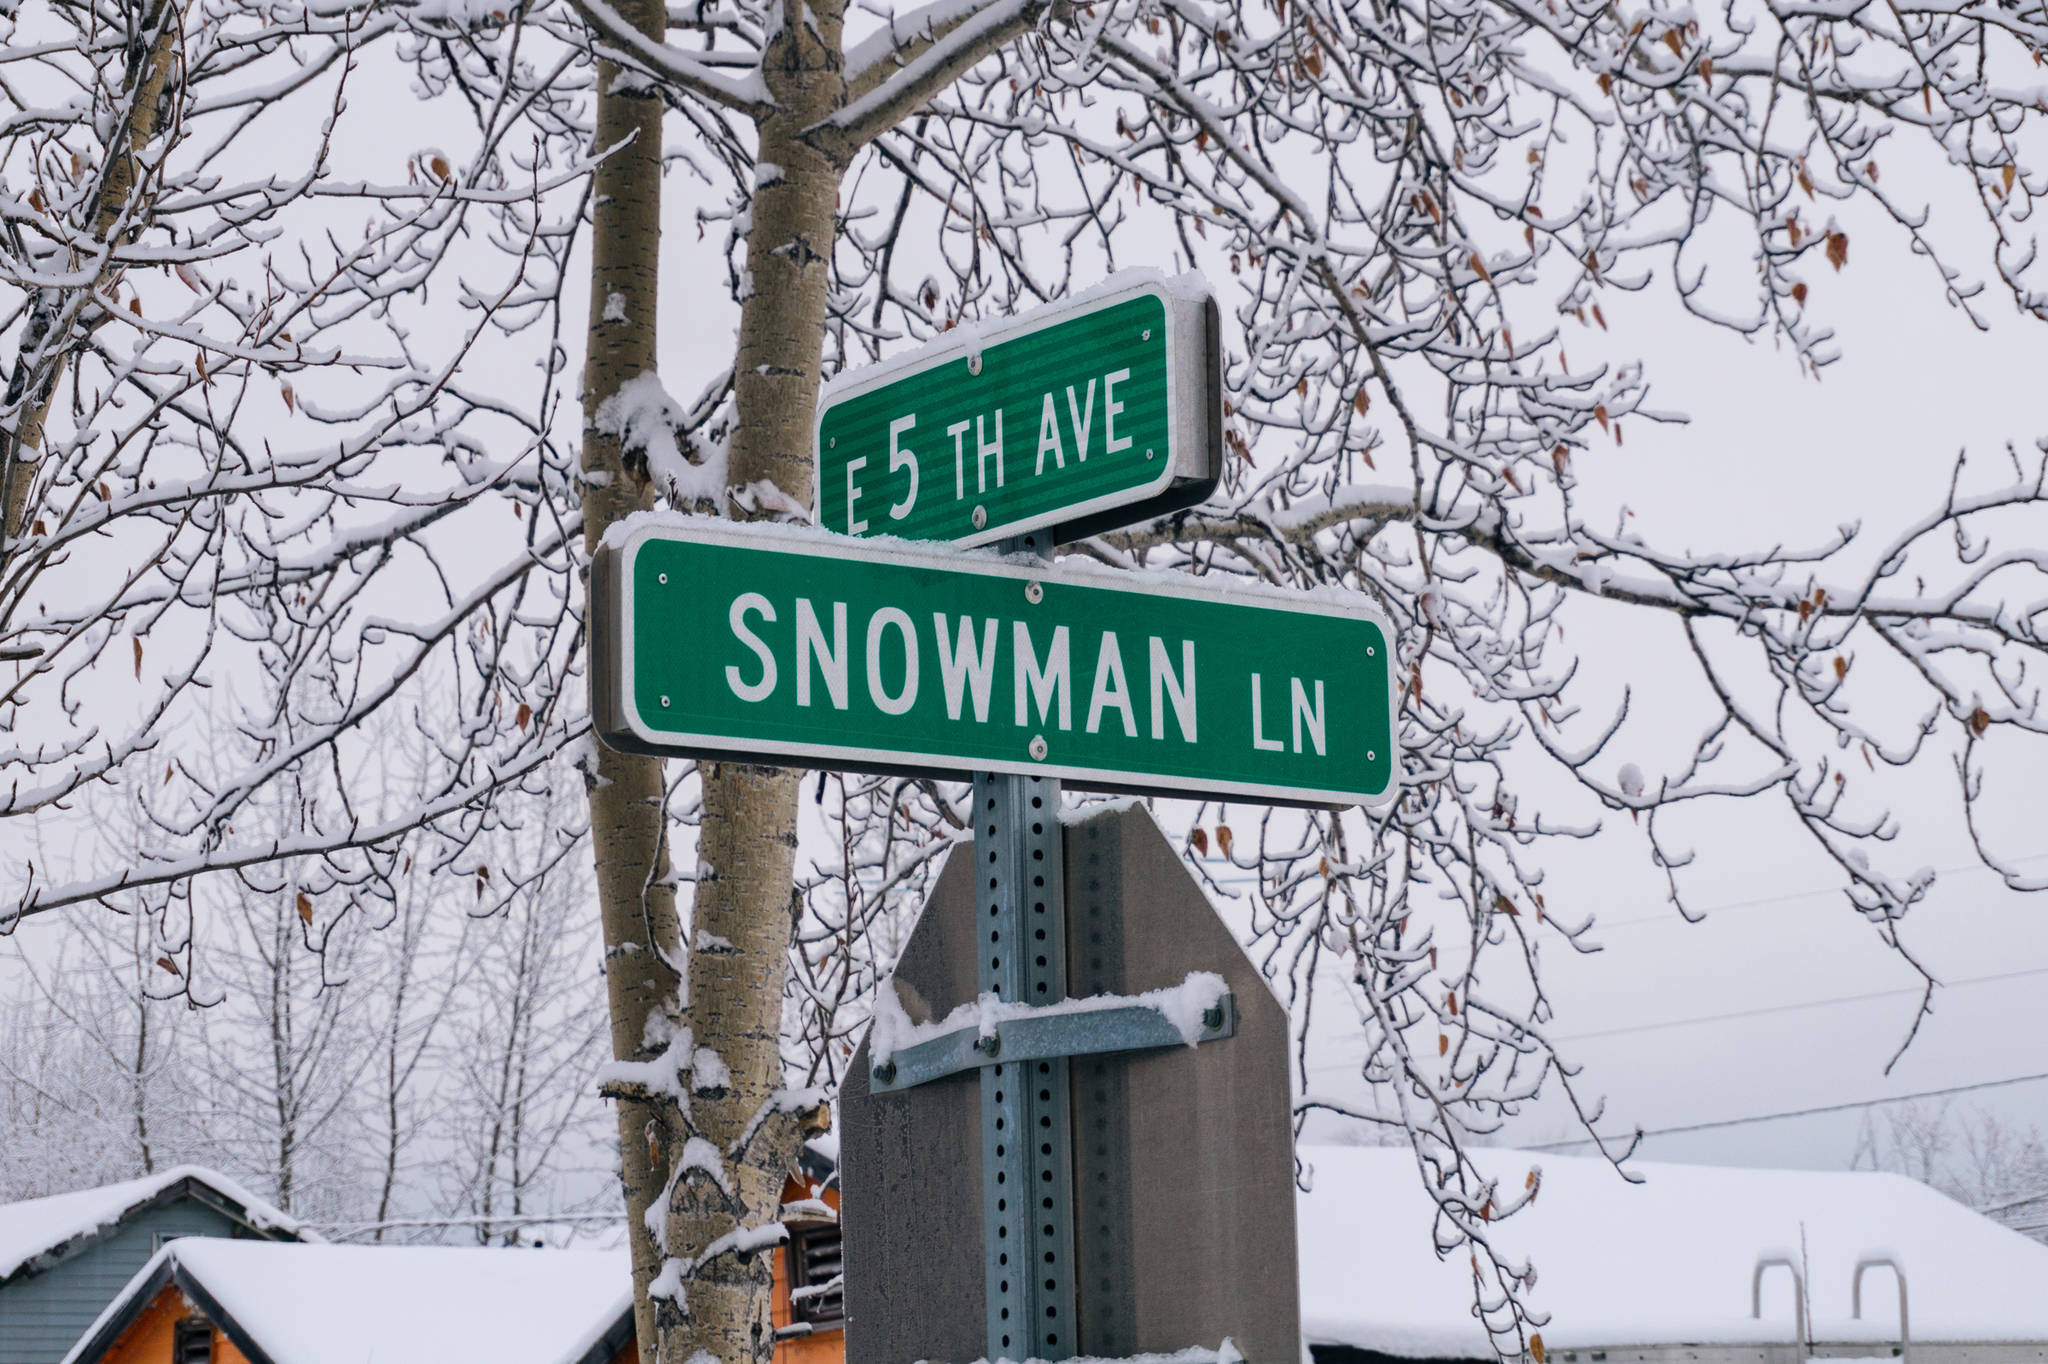 Snowman Lane street sign in North Pole Alaska. (Gabe Donohoe | For the Juneau Empire)